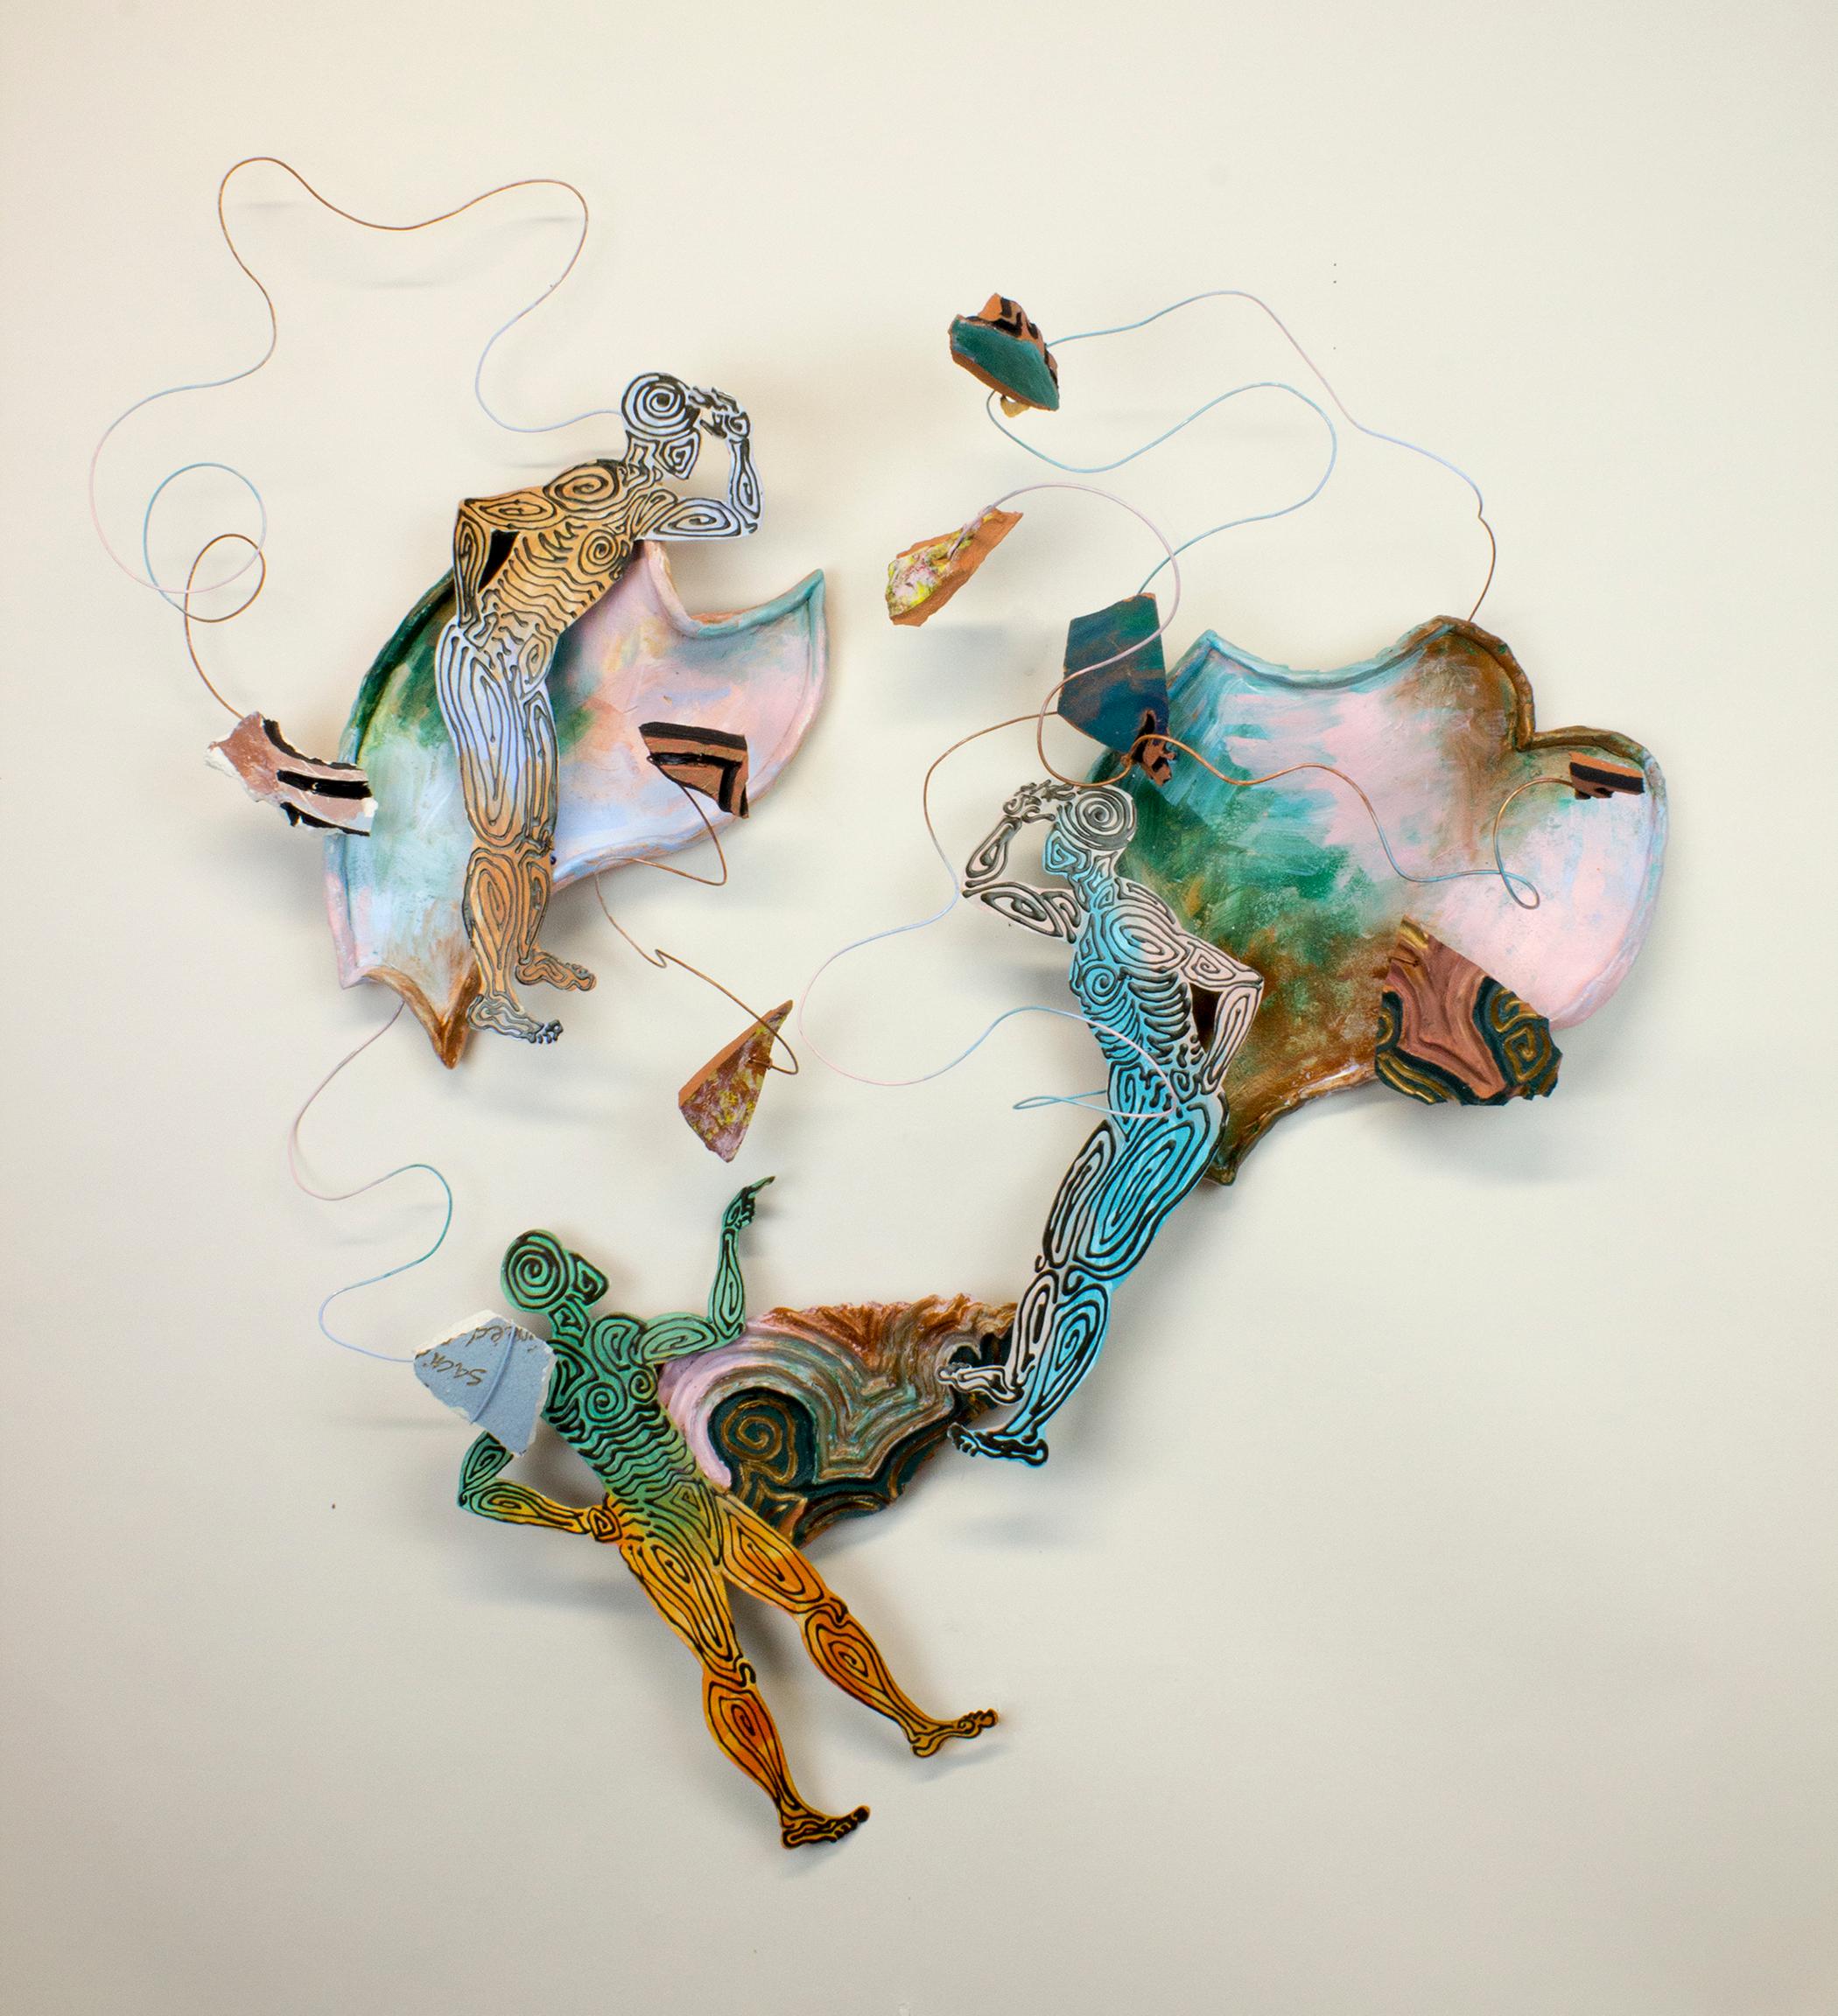 "Neither Here nor There", contemporary, pink, blue, green, metal, sculpture - Sculpture by Virginia Mahoney